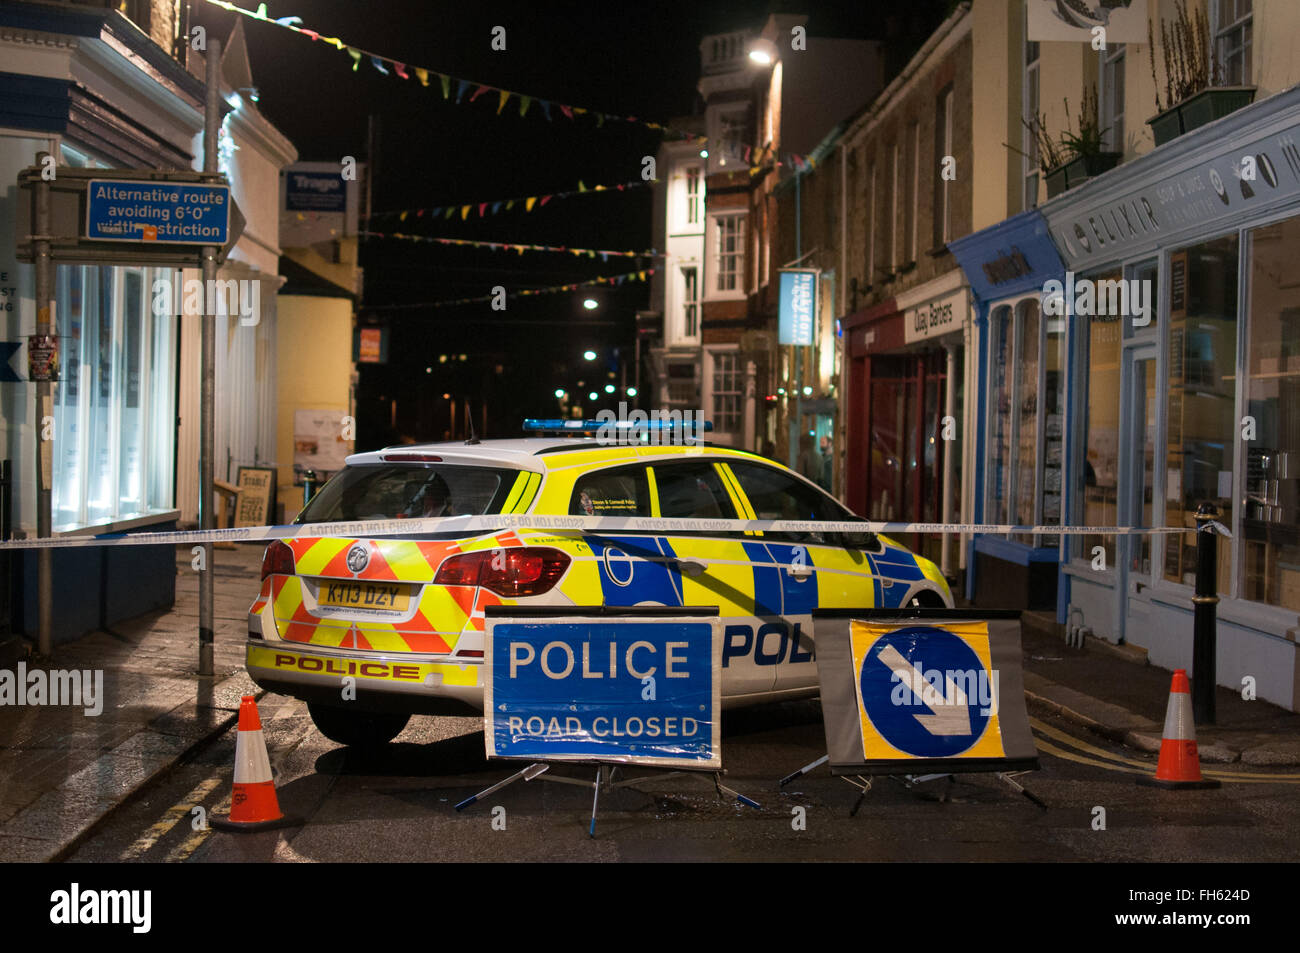 The police cordoned off Falmouth Highstreet due to unsafe conditions caused by a burst water pipe. Stock Photo